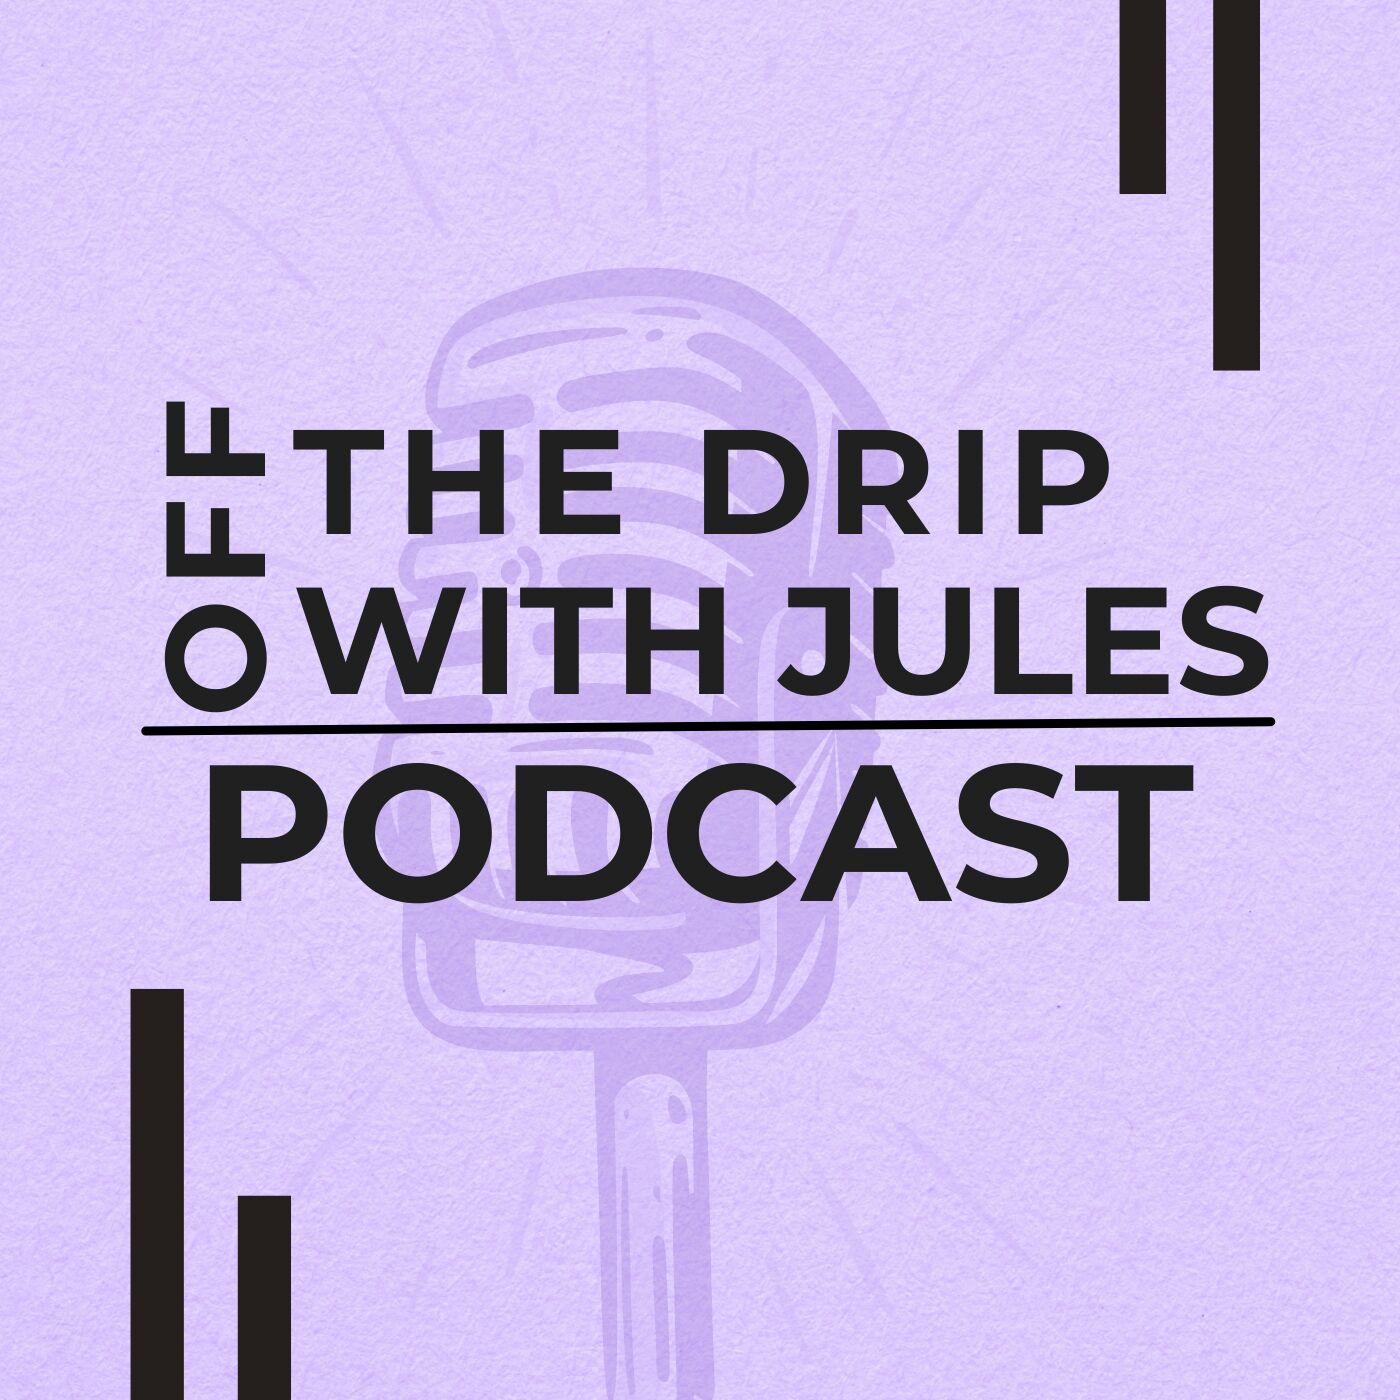 Off the Drip with Jules